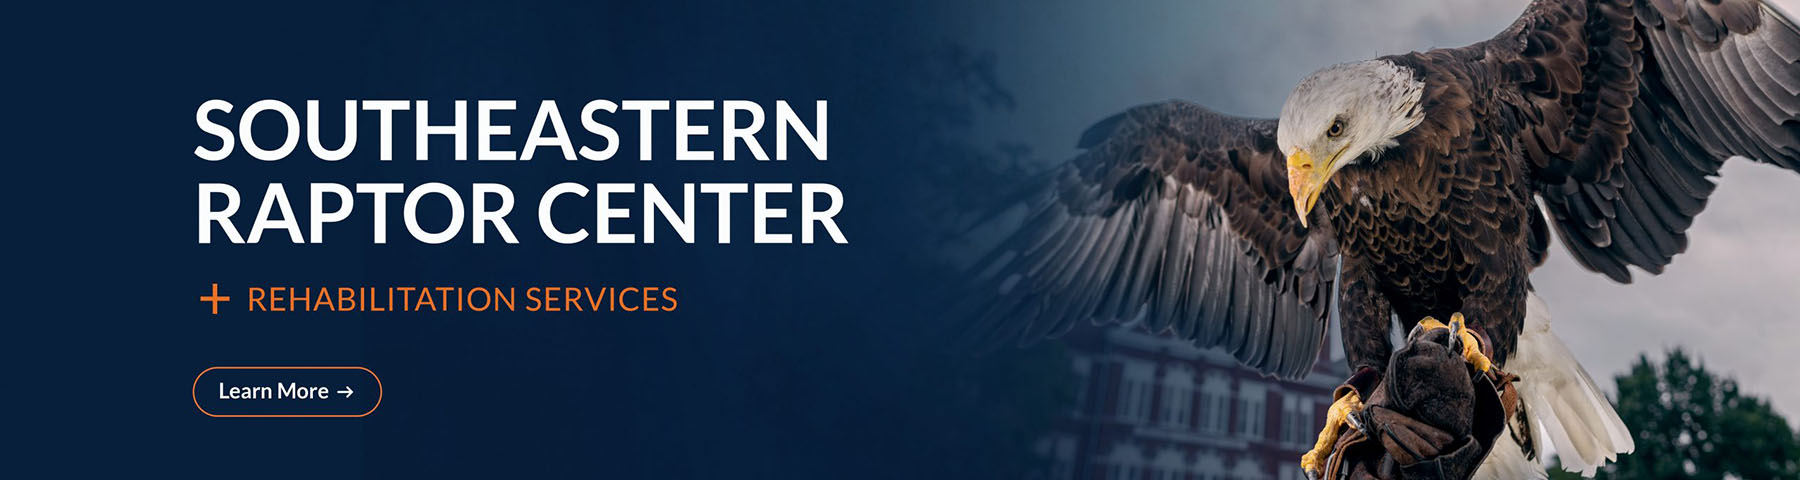 Southeastern Raptor Center and Rehabilitation Services